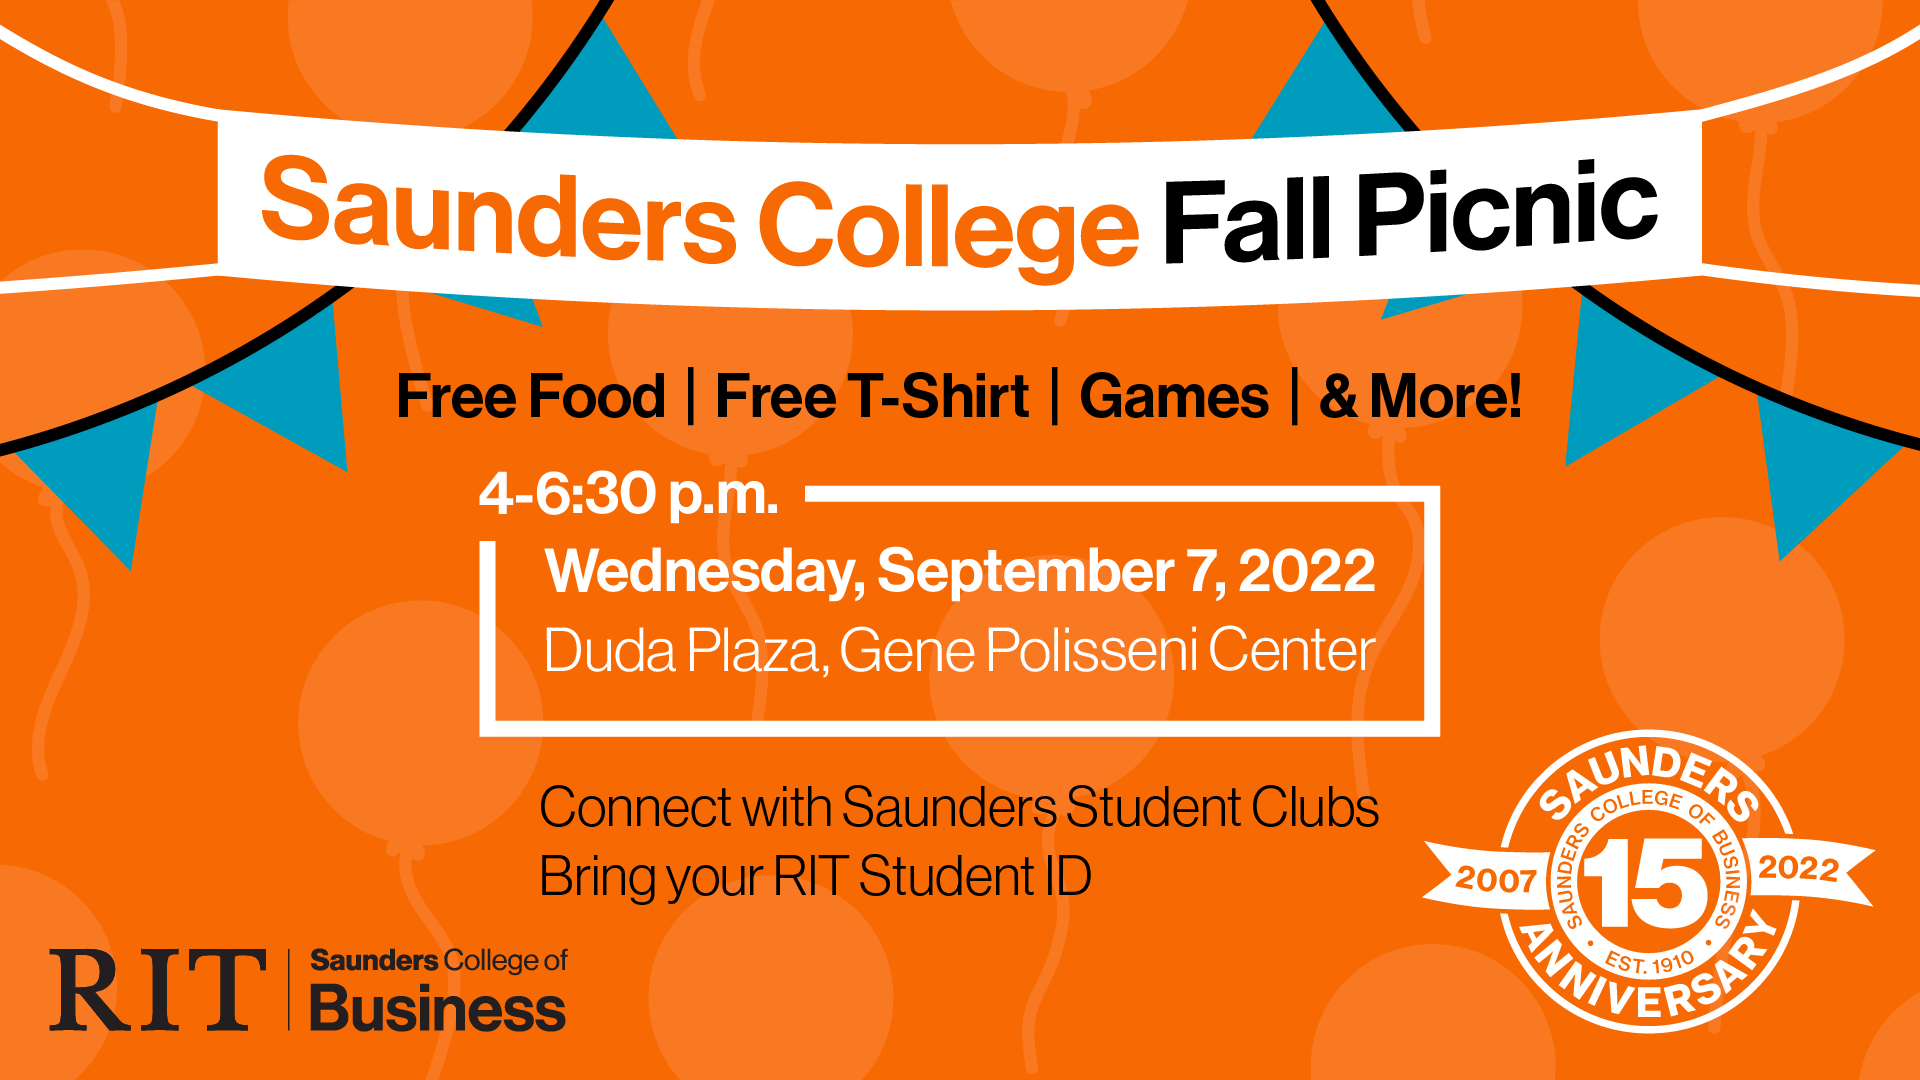 Saunders College Fall Picnic